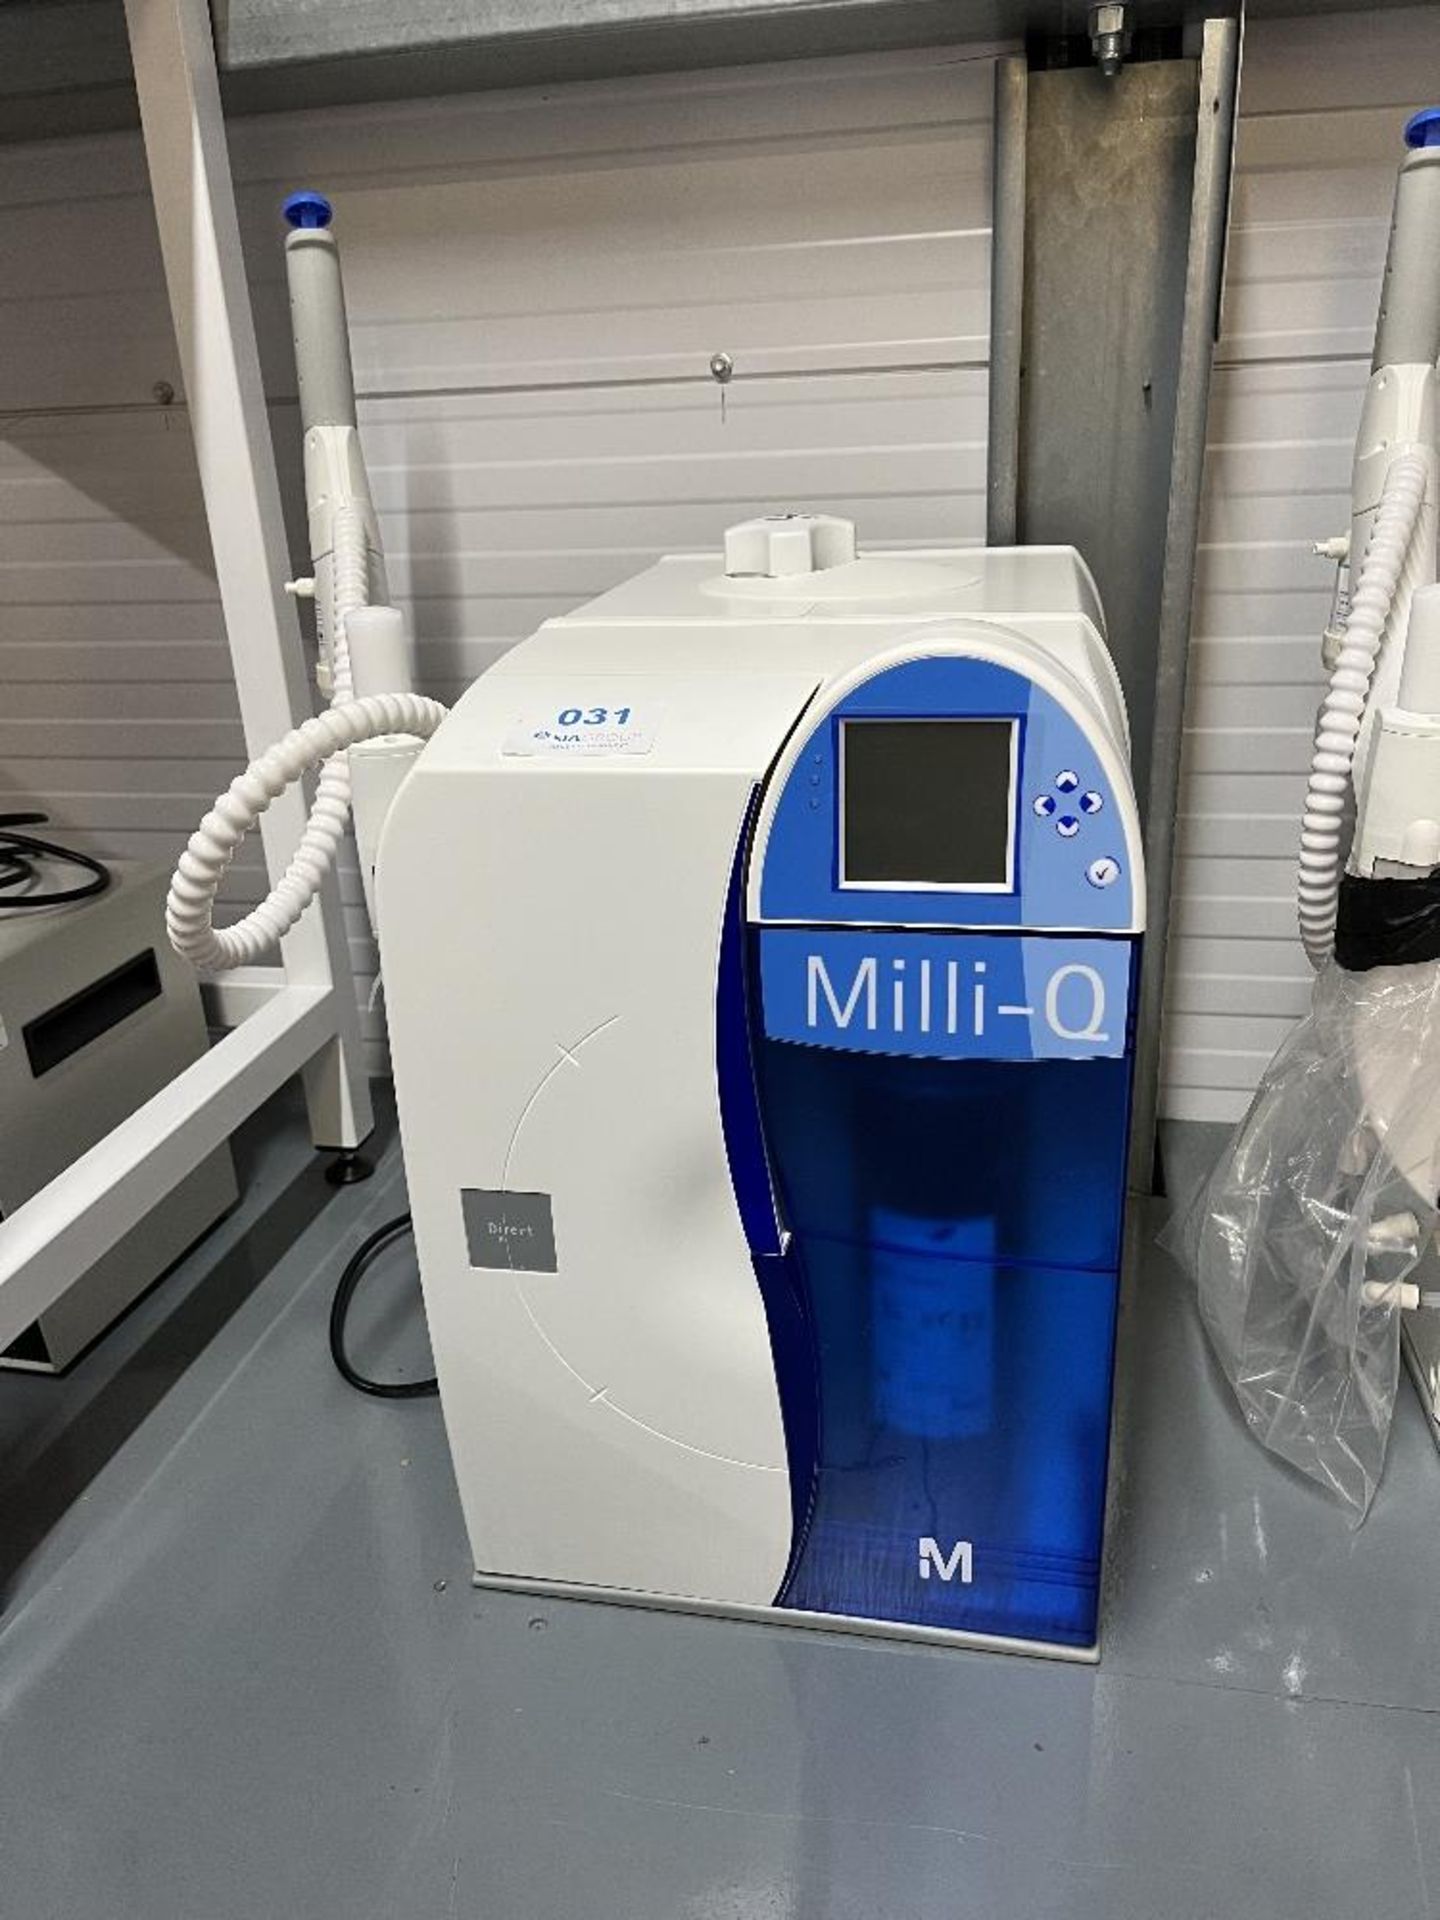 Milli-Q Direct 8 Water Purification System - Image 2 of 8